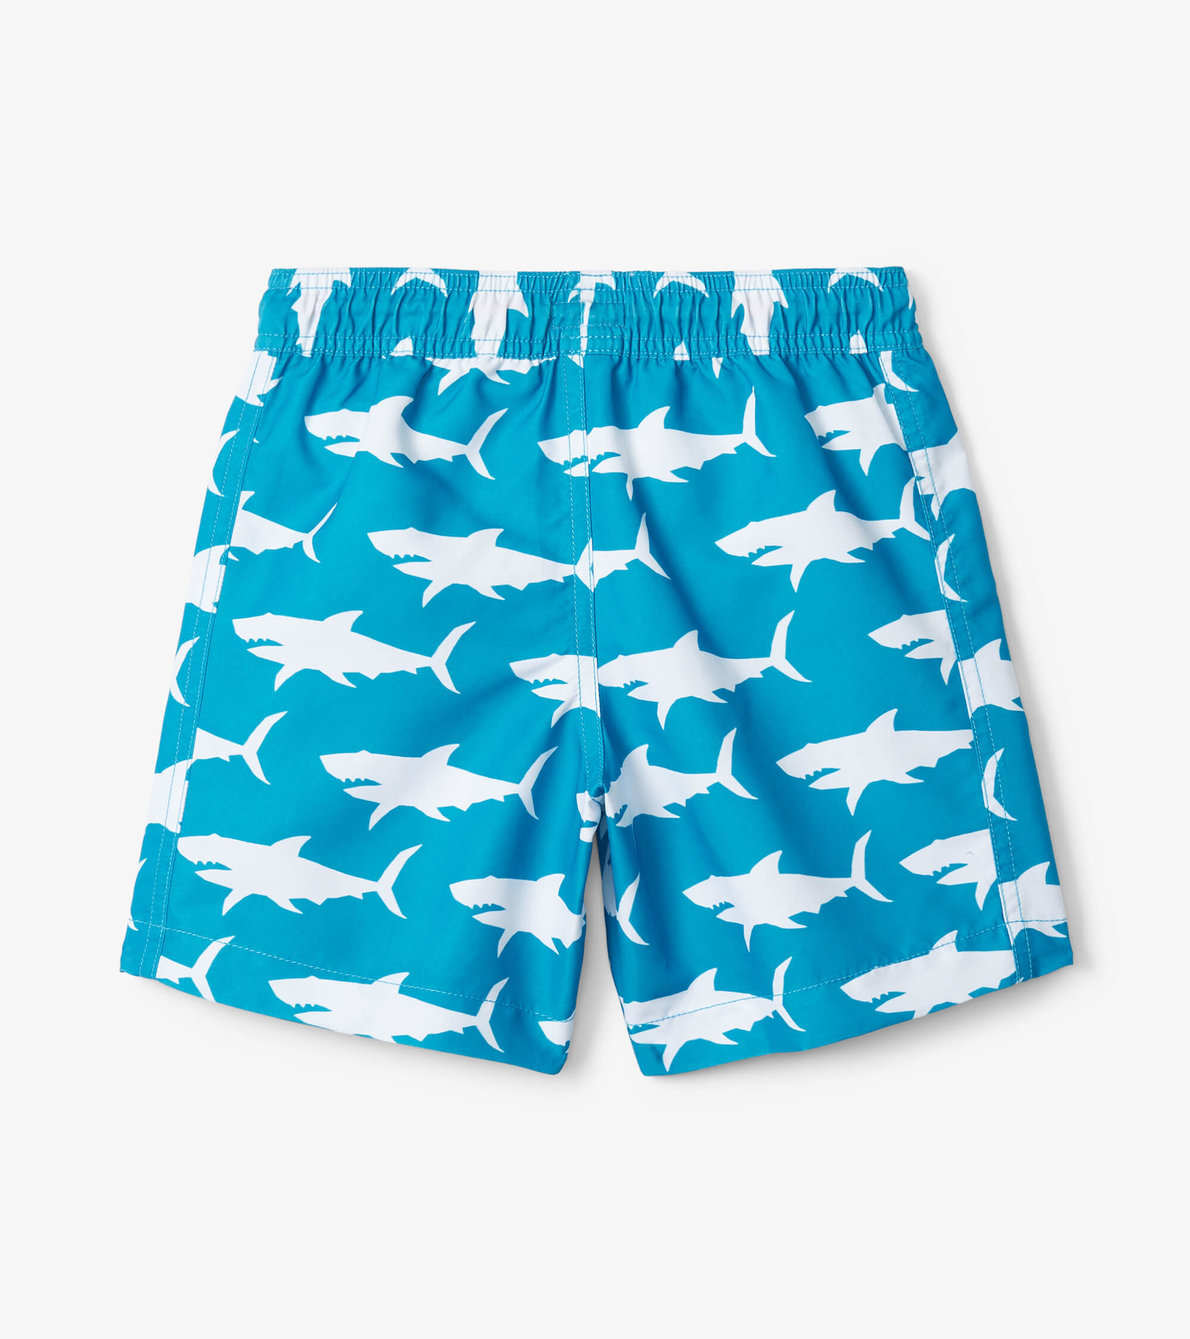 View larger image of Hungry Sharks Swim Trunks